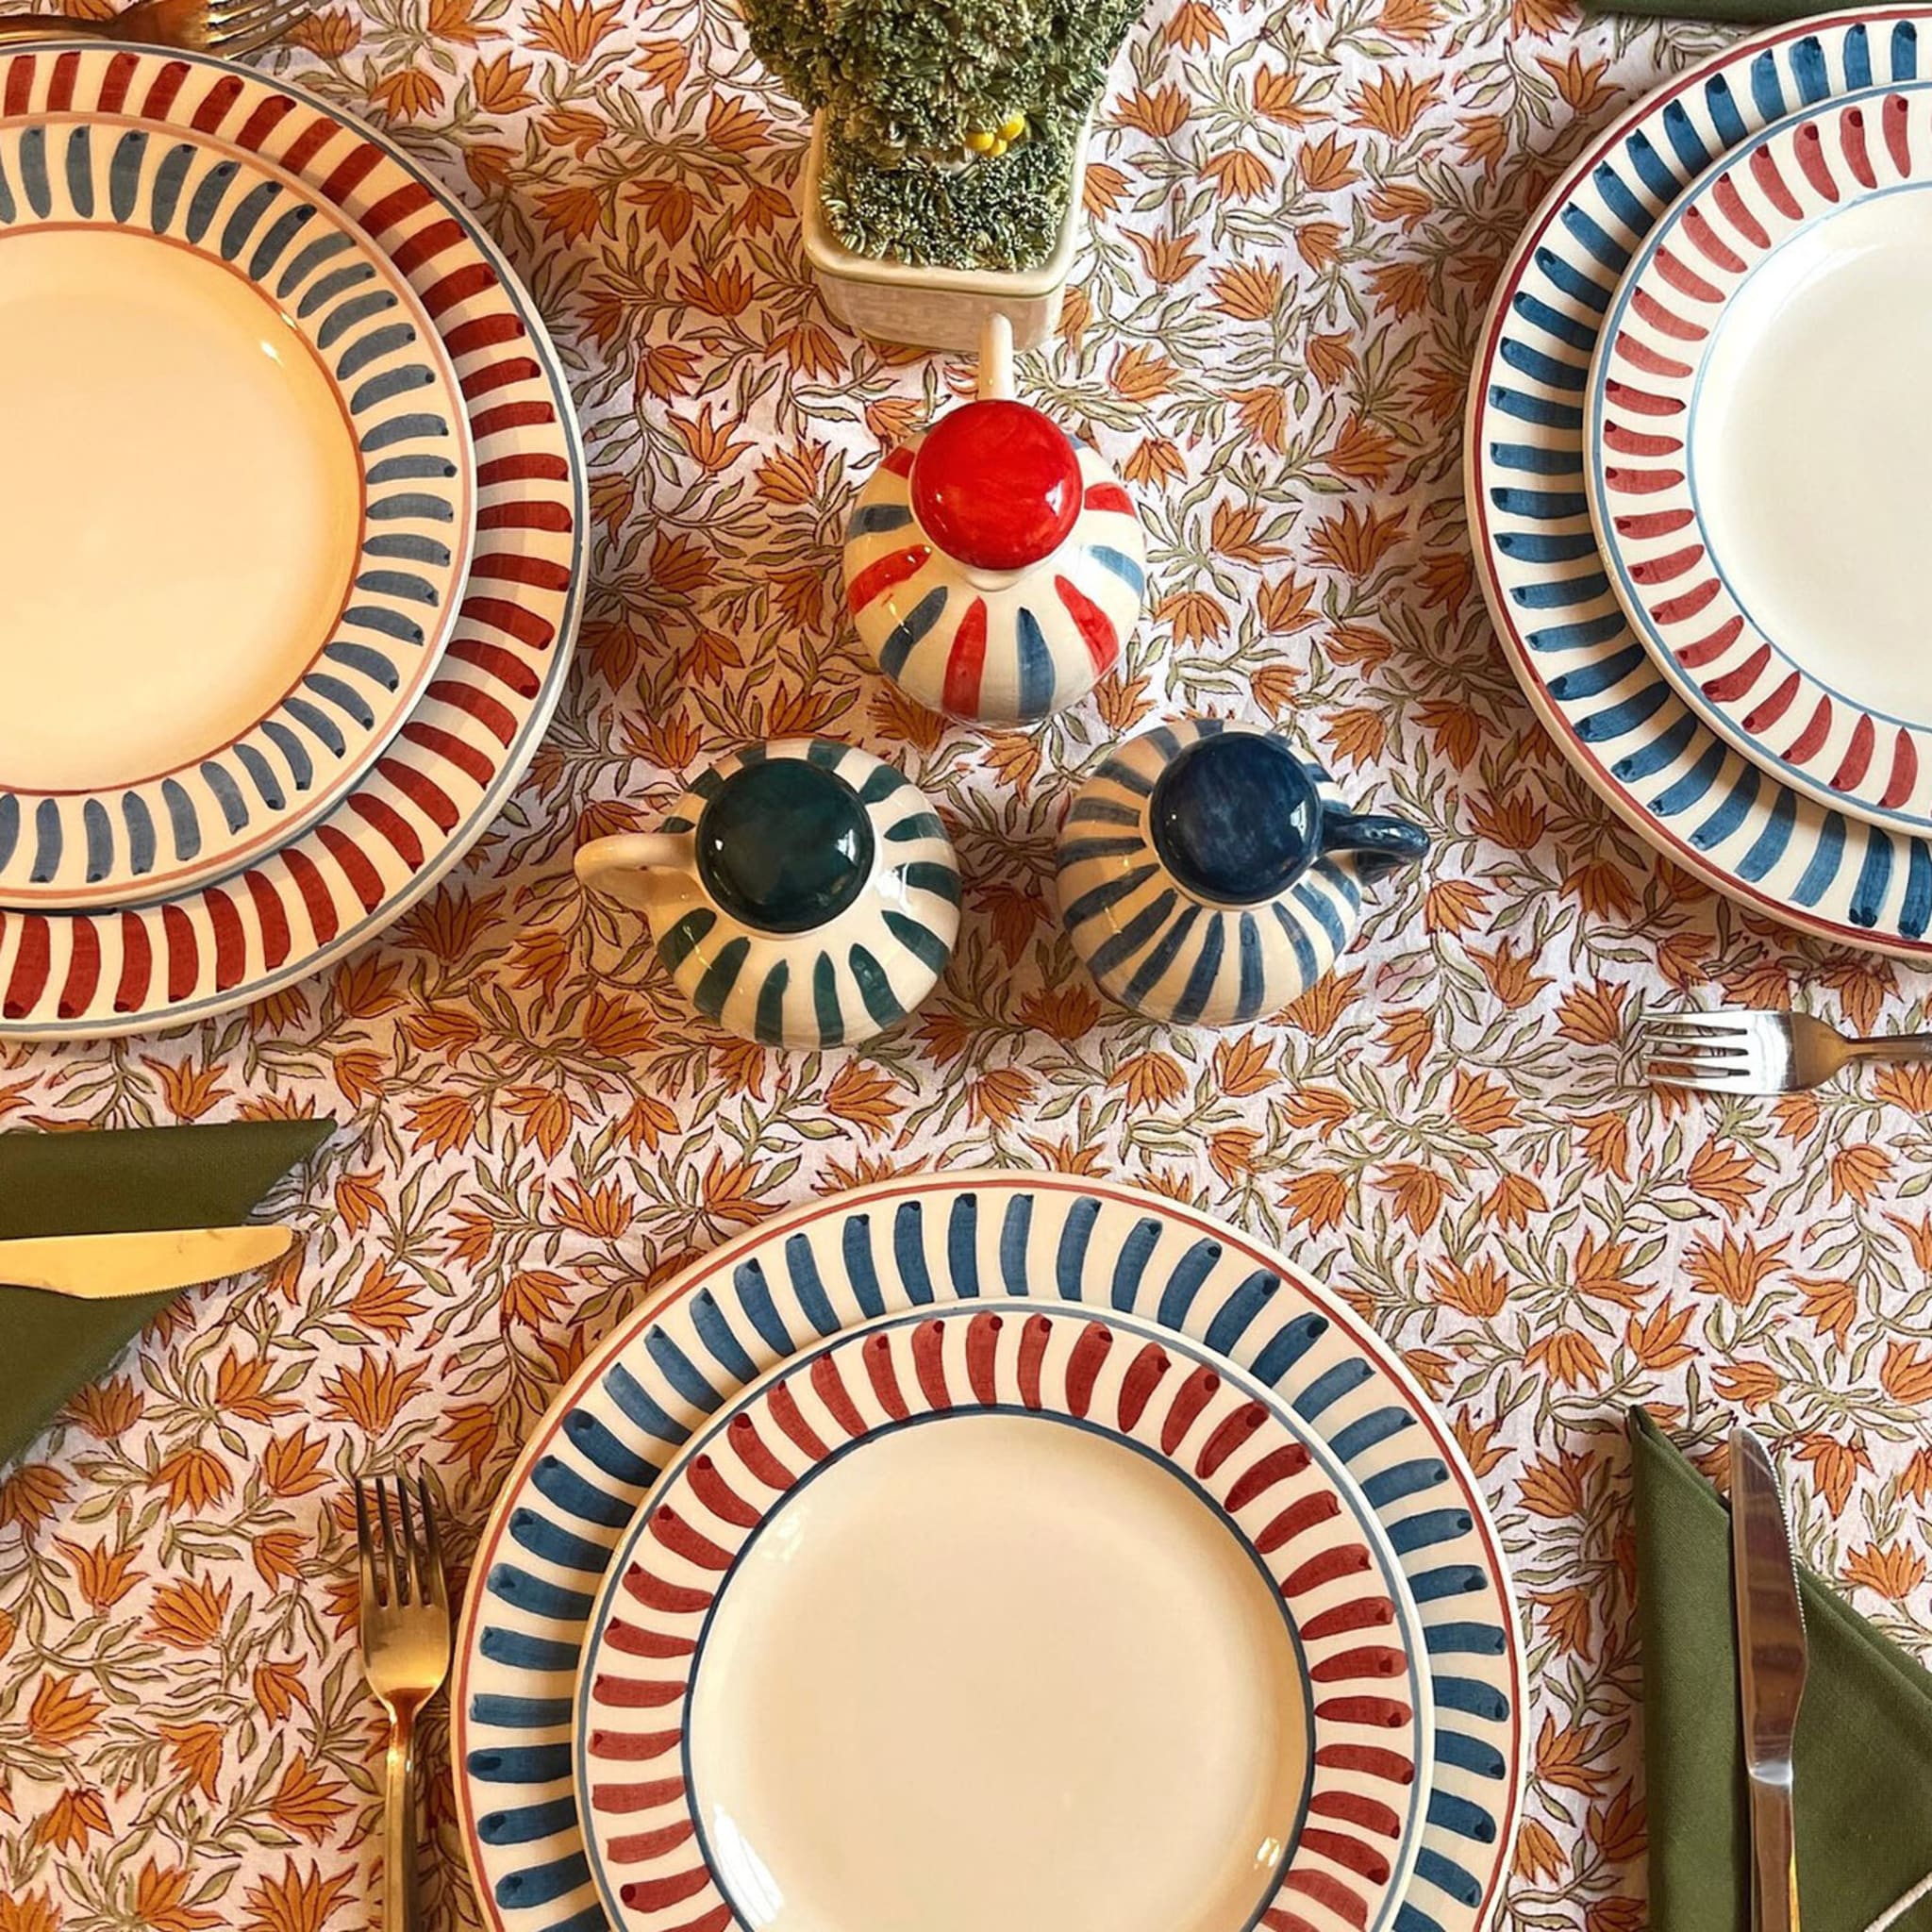 Set of 12 Ceramic Red and Blue Dining Plates - Alternative view 1